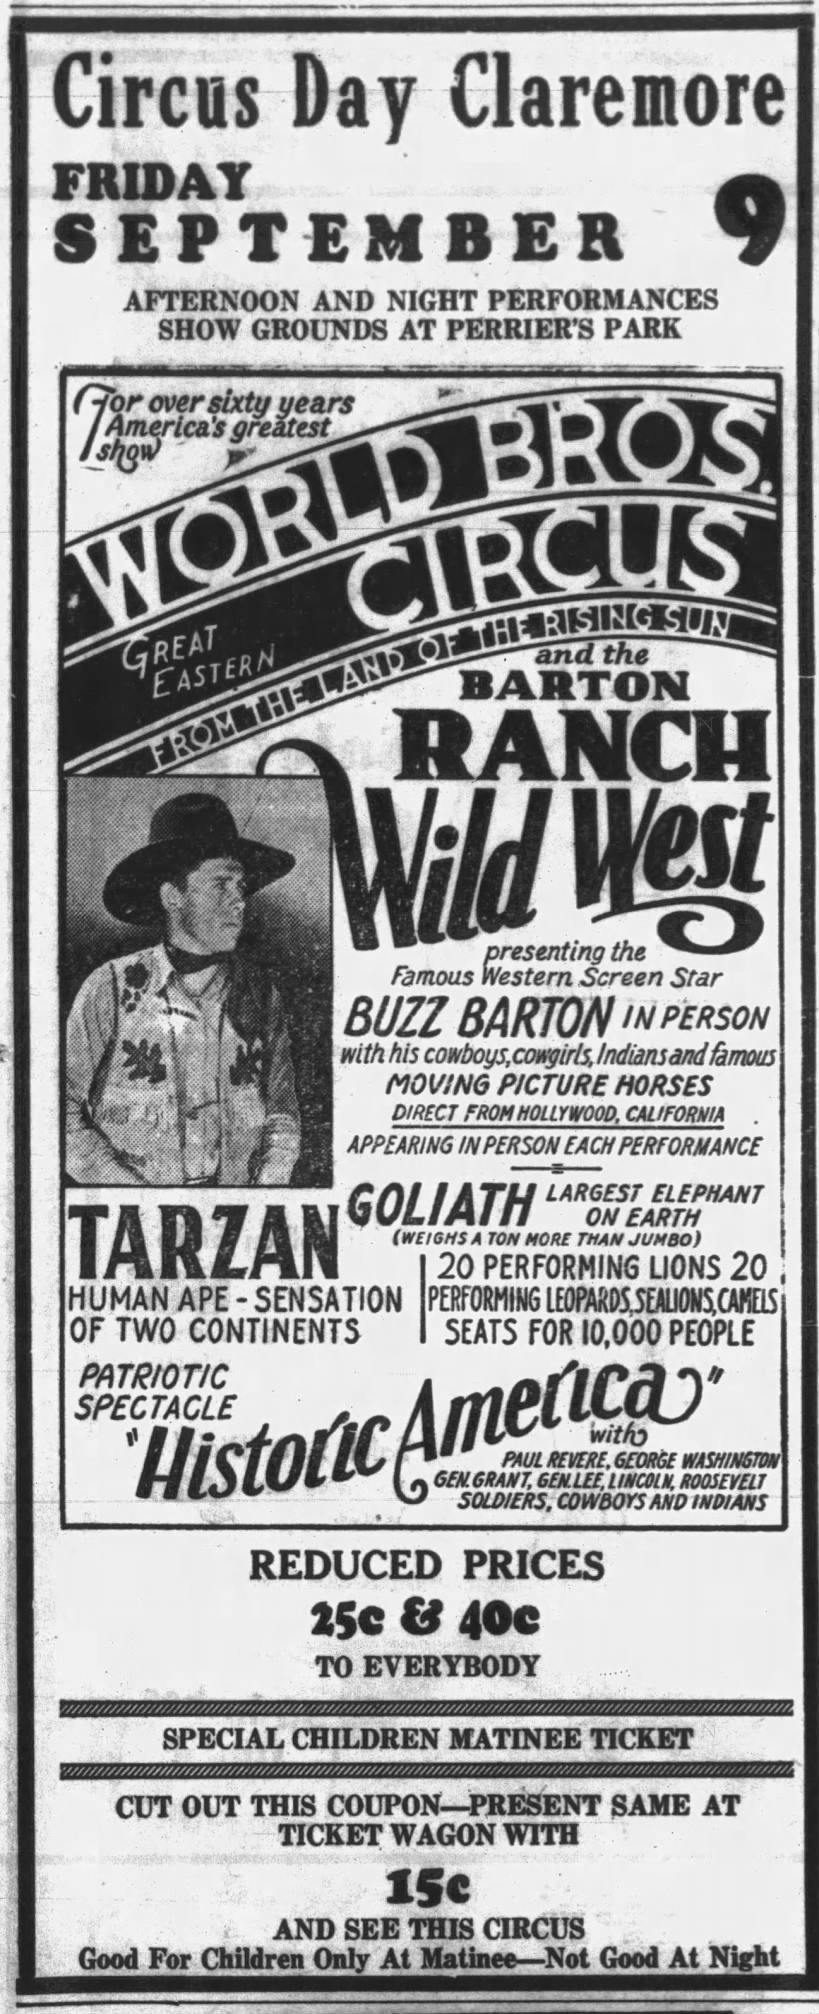 Buzz Barton Ranch Wild West show appearing with World Bros. Circus.